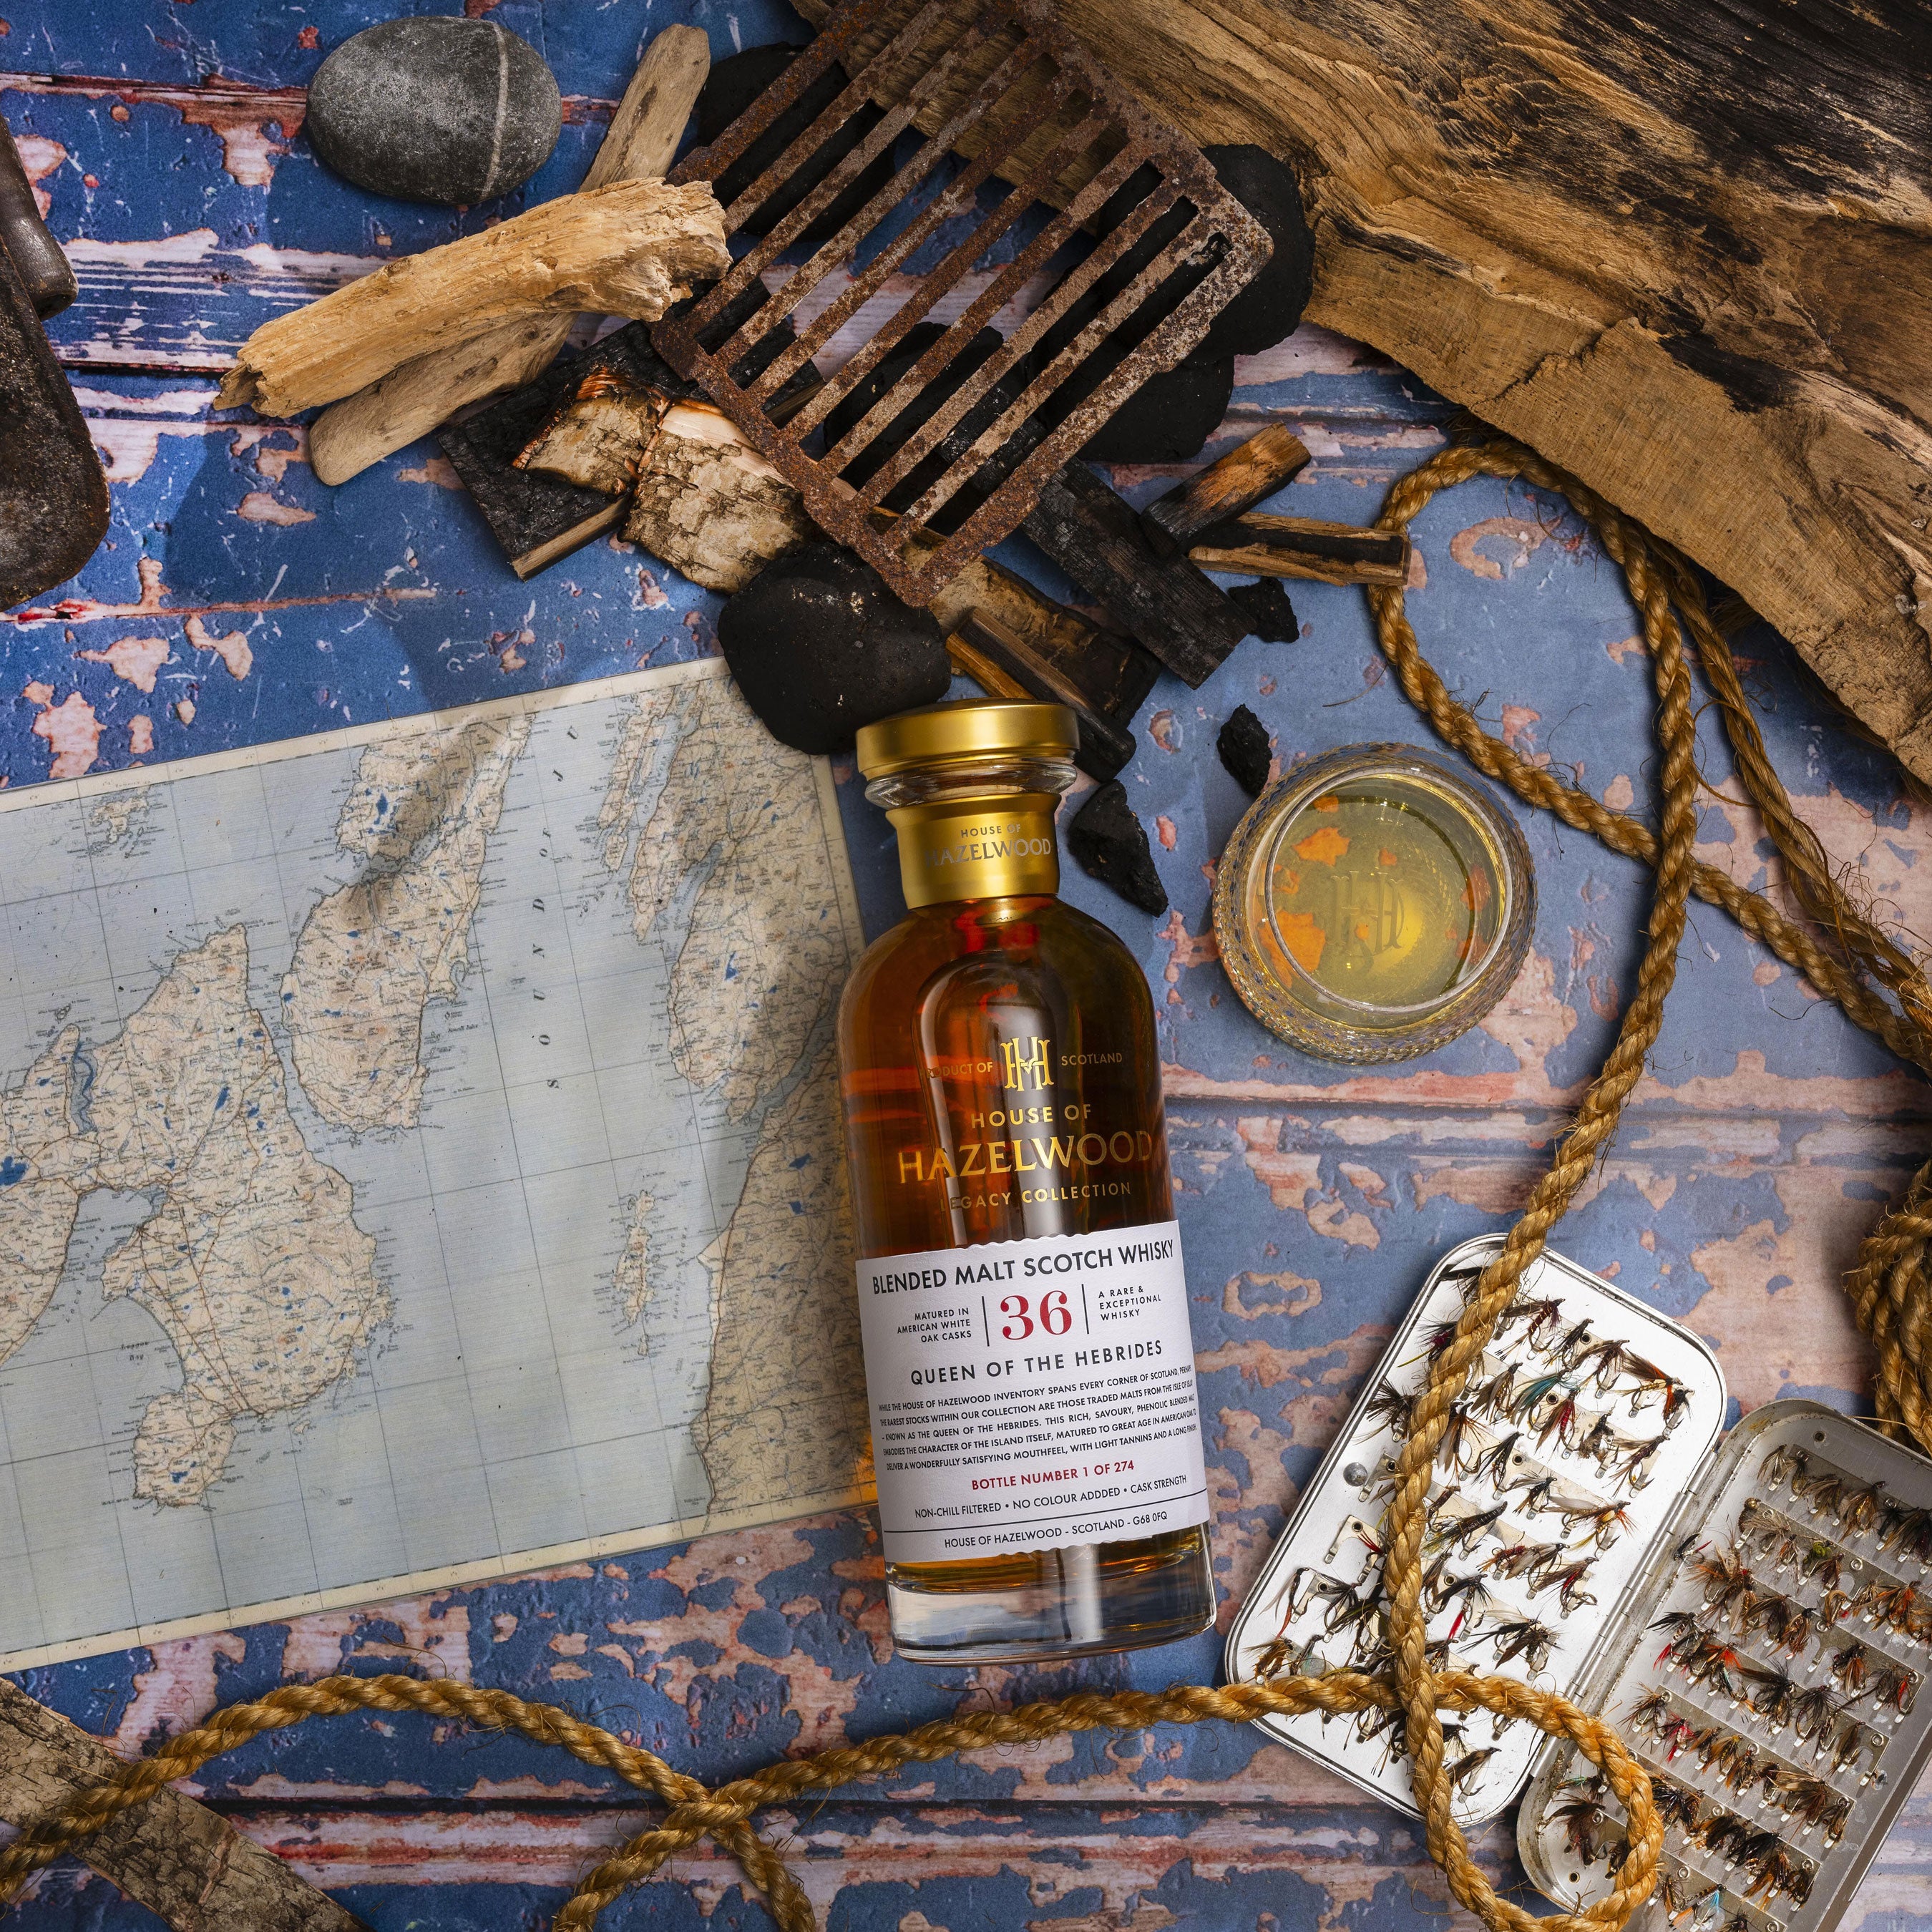 The Ultimate Whisky Escape Package